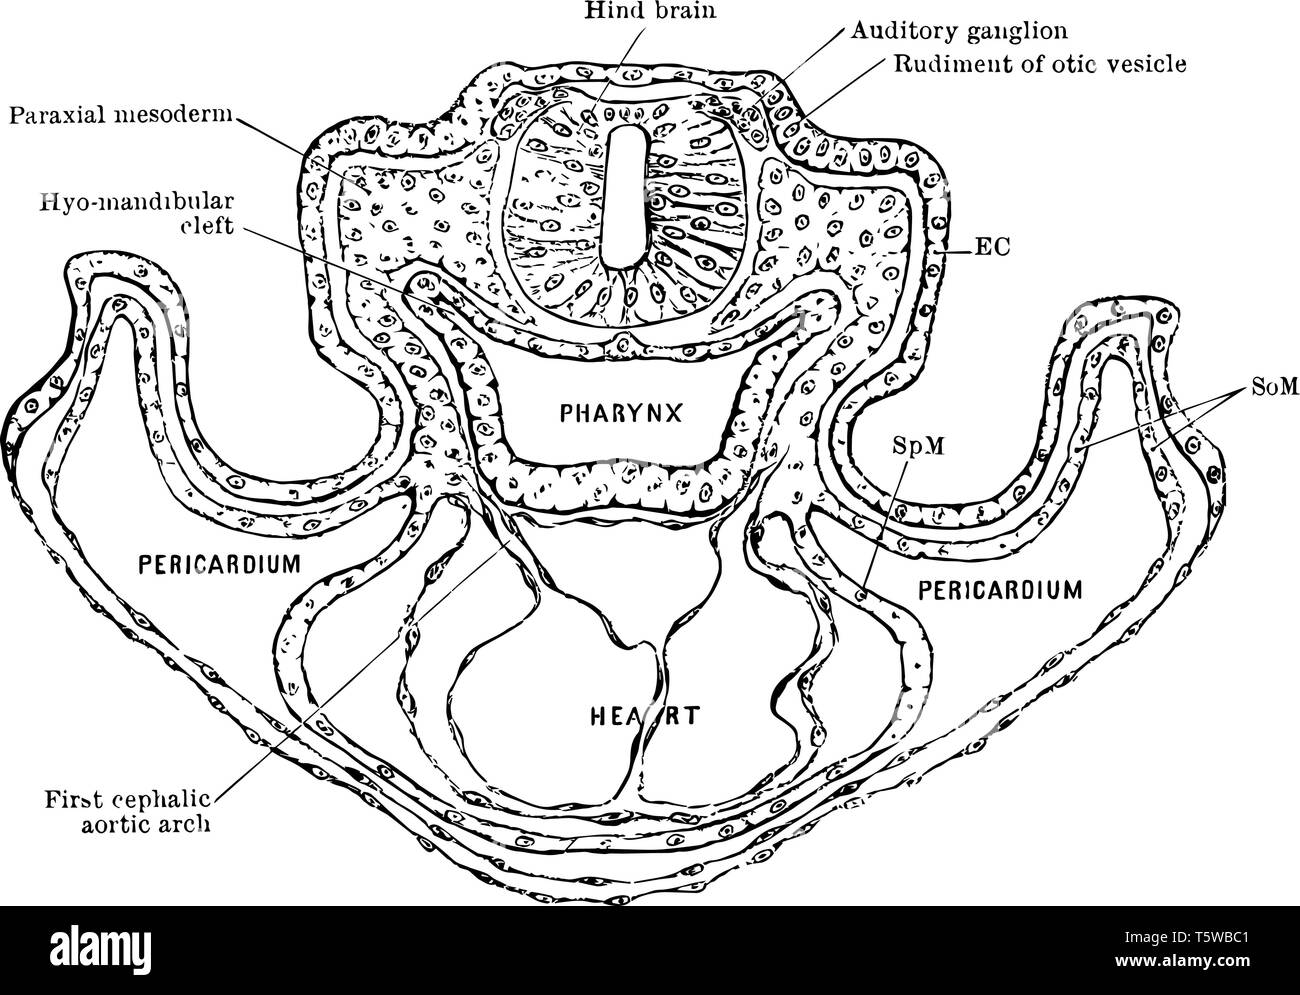 Transverse Section of a Rat Embryo showing relation of the paraxial mesoderm of the head to the lateral plates vintage line drawing or engraving illus Stock Vector